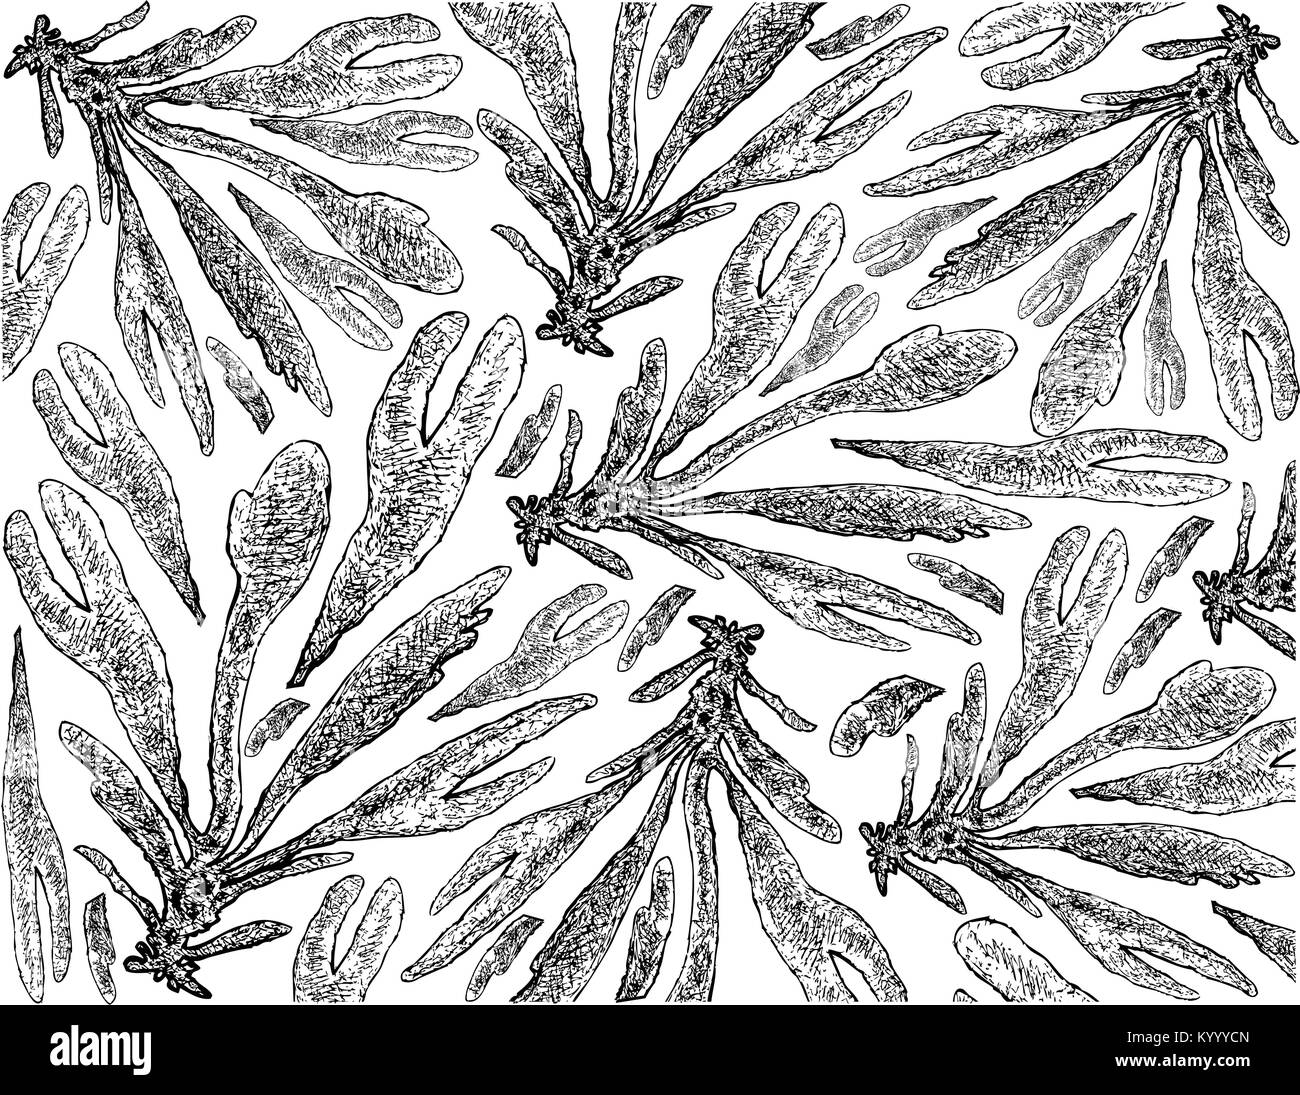 Sea Vegetables, Illustration  Background of Hand Drawn Sketch Dulse, Dillisk or Palmaria Palmata Seaweed. High in Calcium, Magnesium and Iodine. Stock Vector